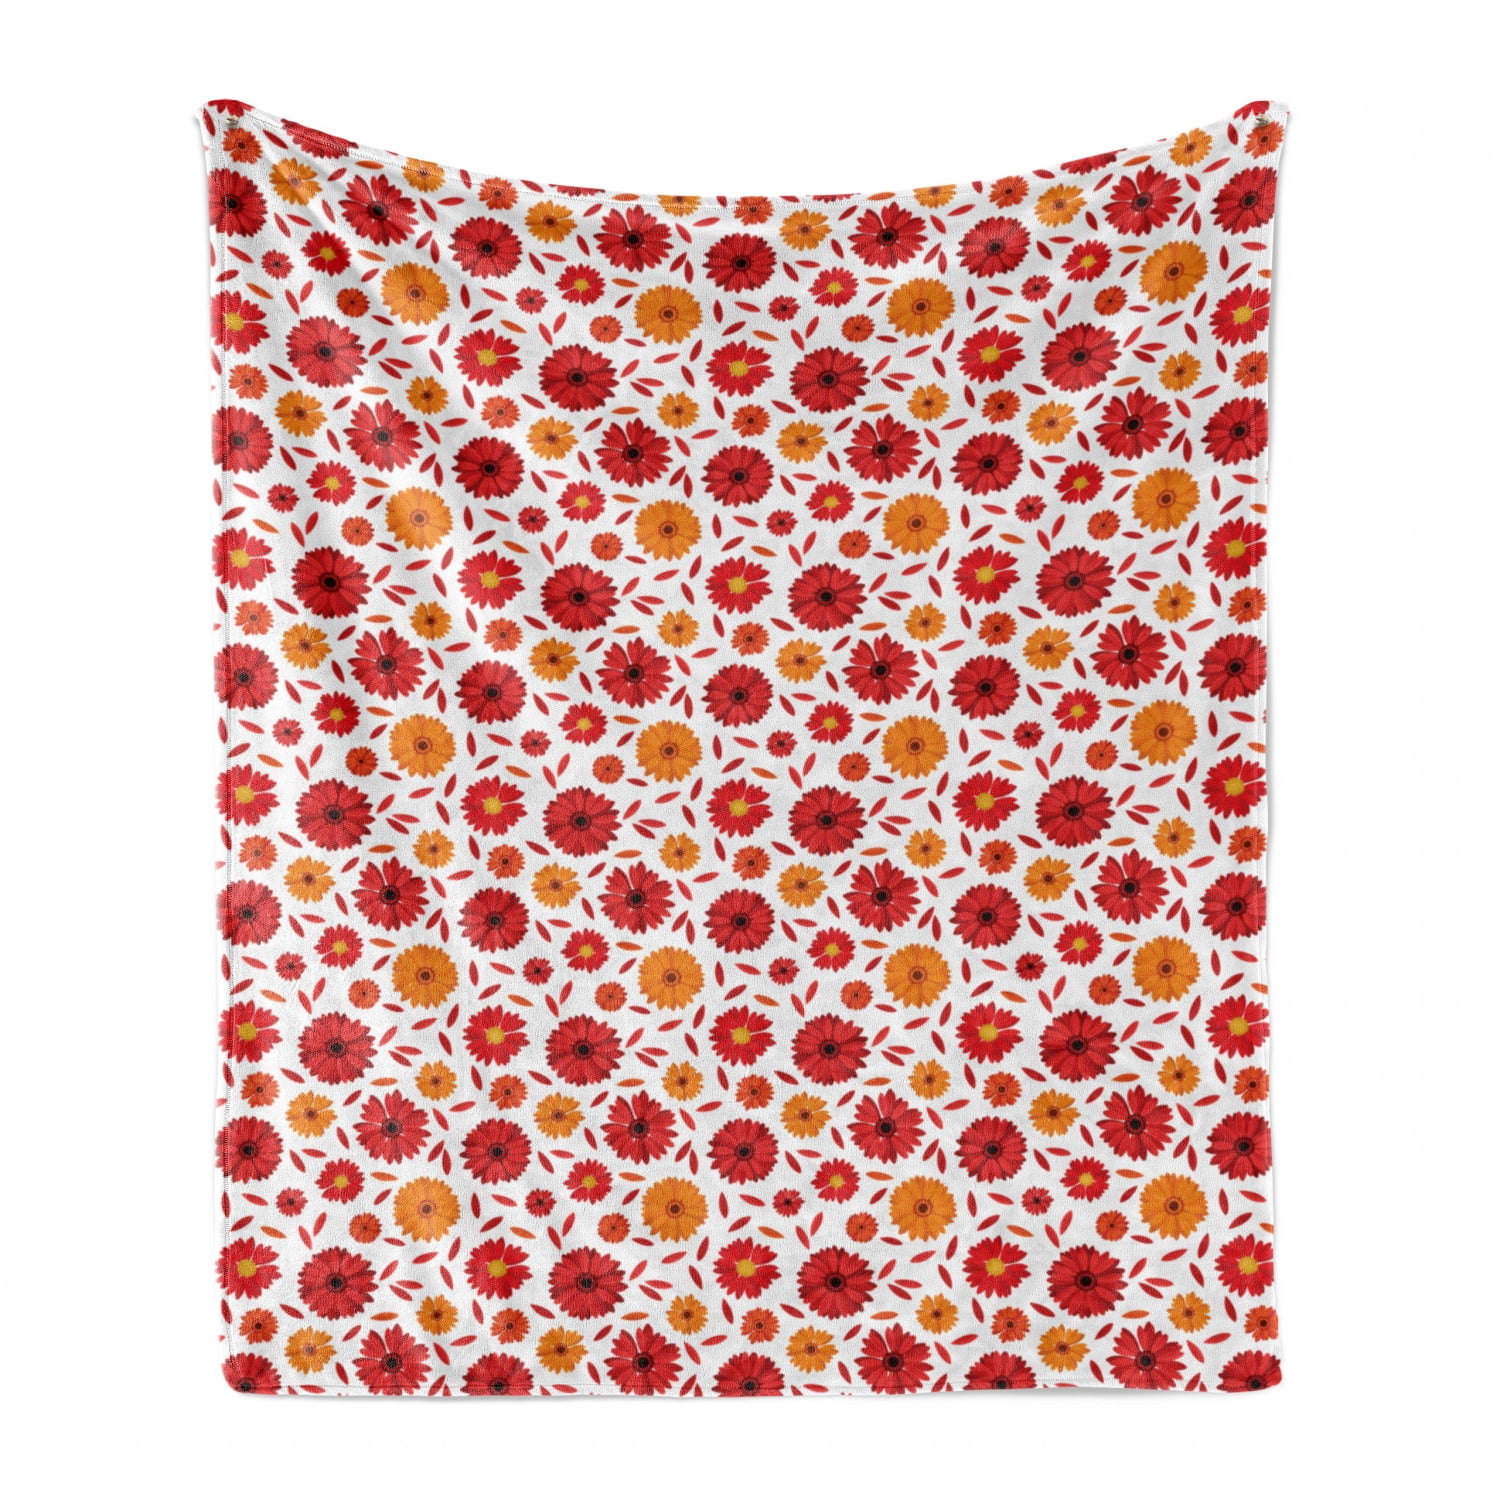 Orange and Vermilion Cozy Plush for Indoor and Outdoor Use Ambesonne Autumn Soft Flannel Fleece Throw Blanket 50 x 60 Warm Colored Fall Leaves Botanical Art Design Floral Nature Repetition